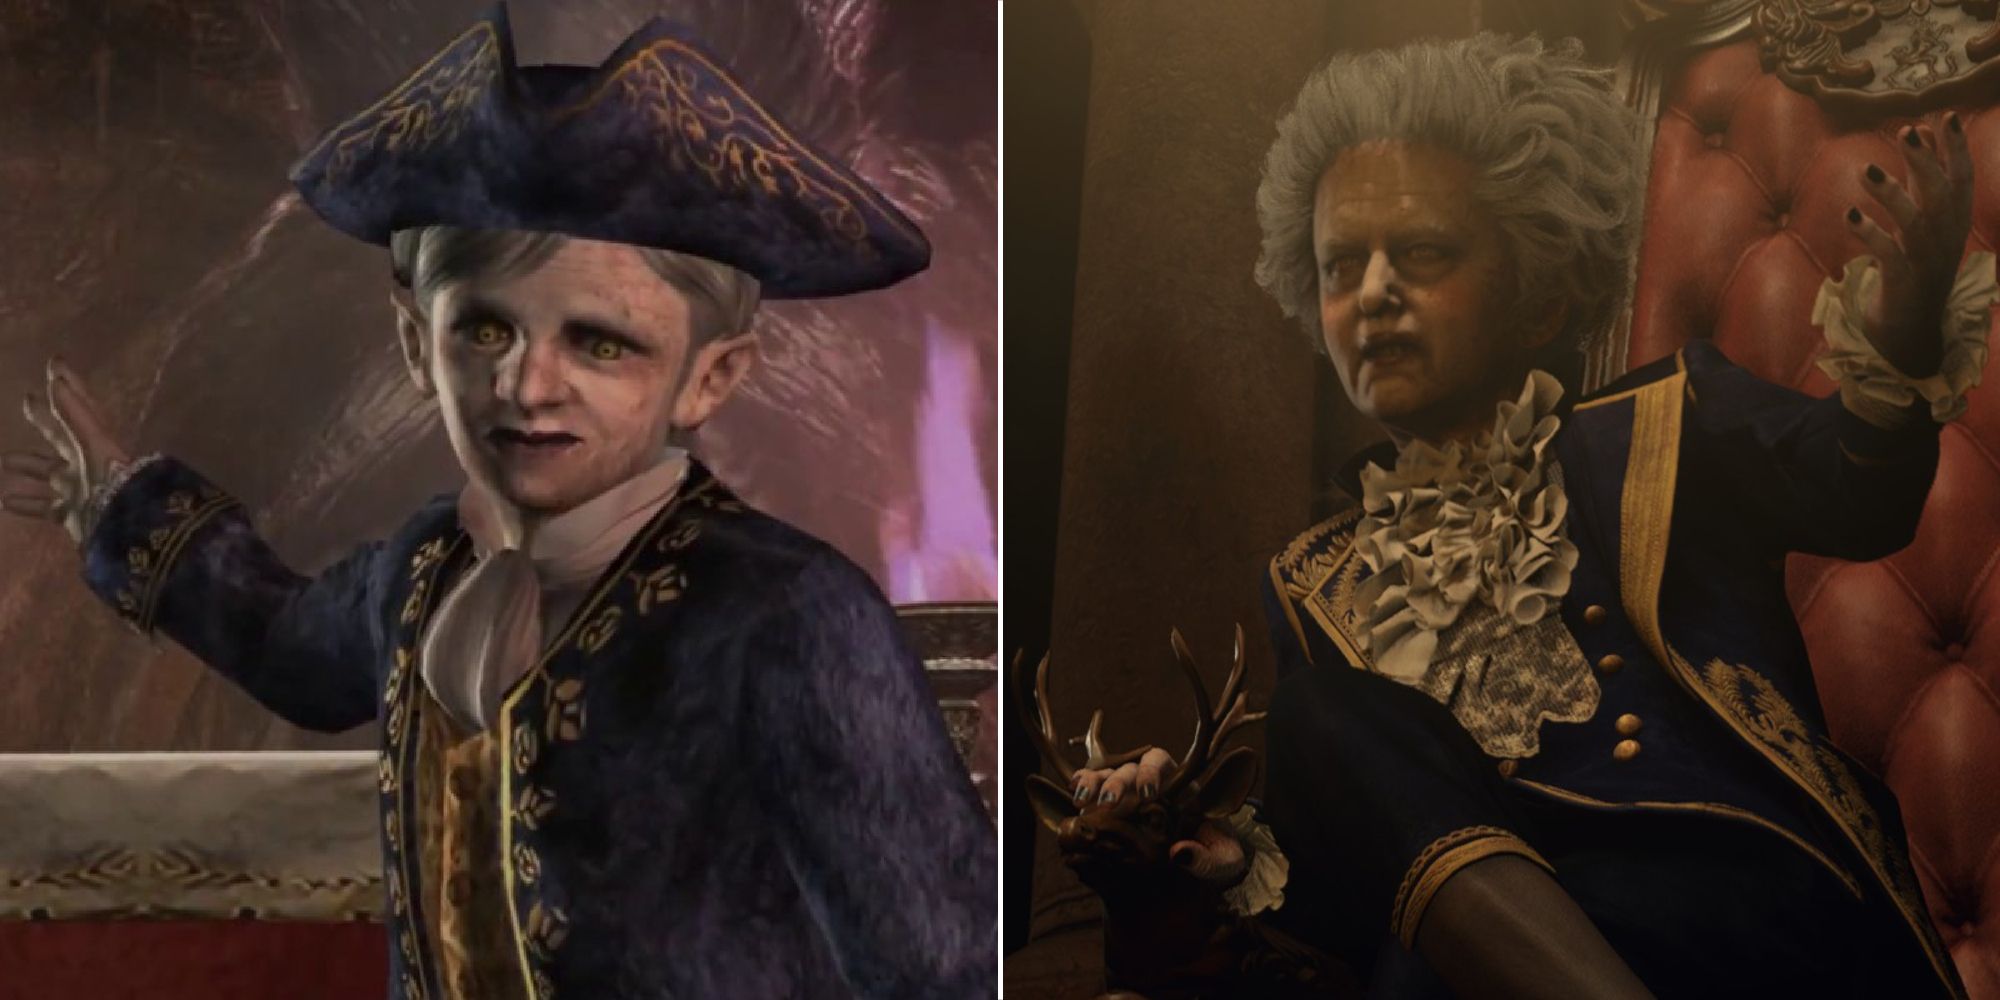 The original and remake versions of Ramon Salazar from Resident Evil 4